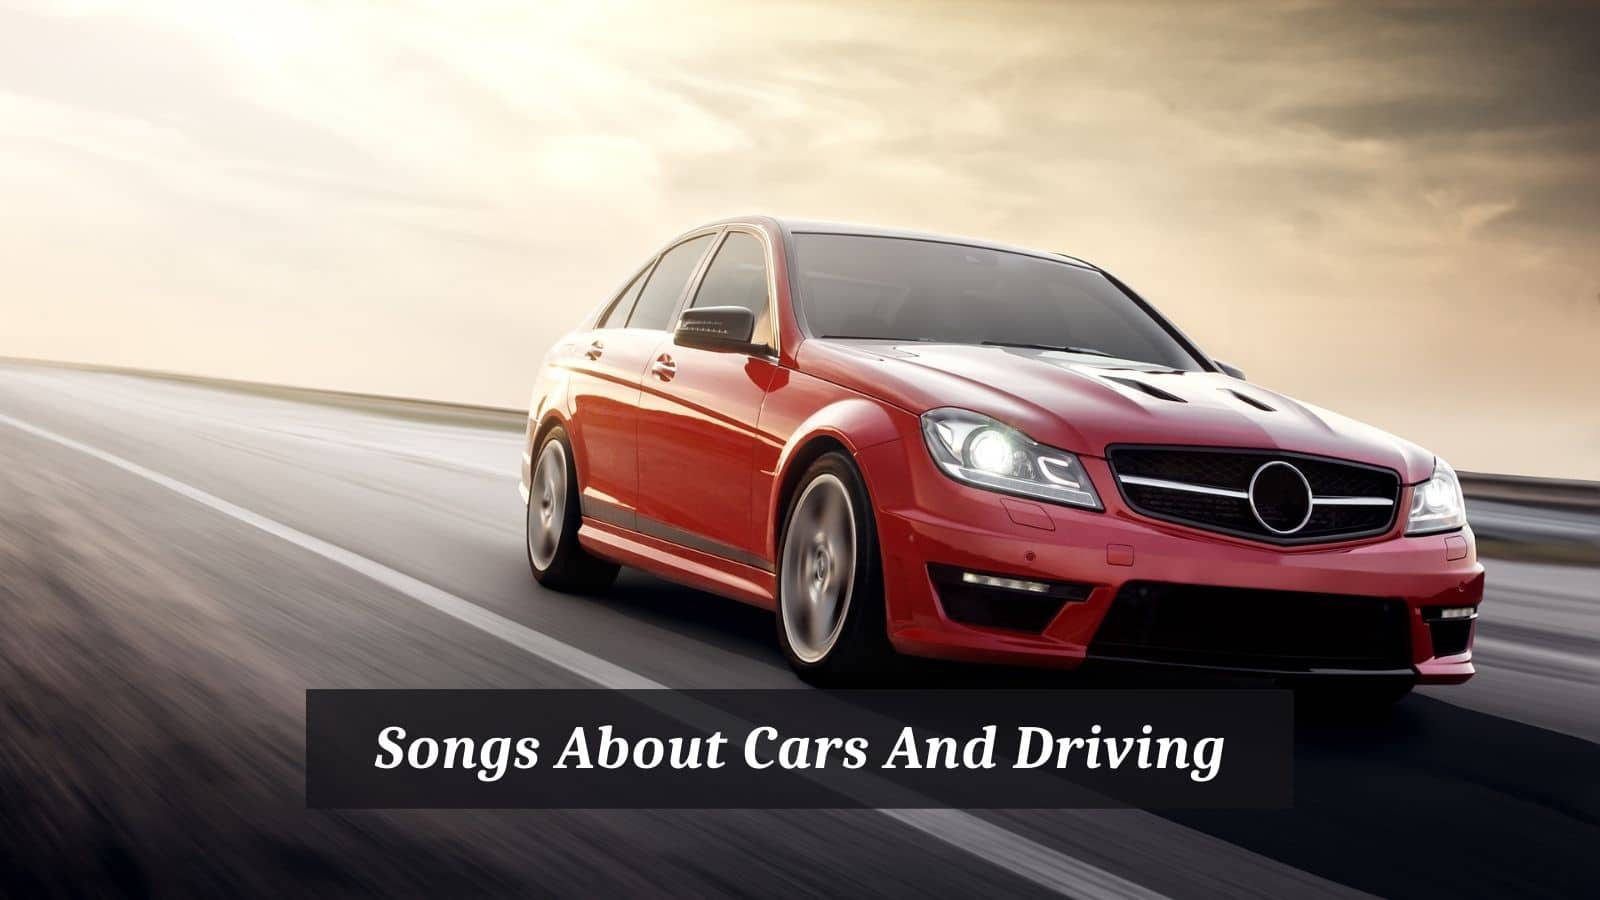 Songs About Cars And Driving